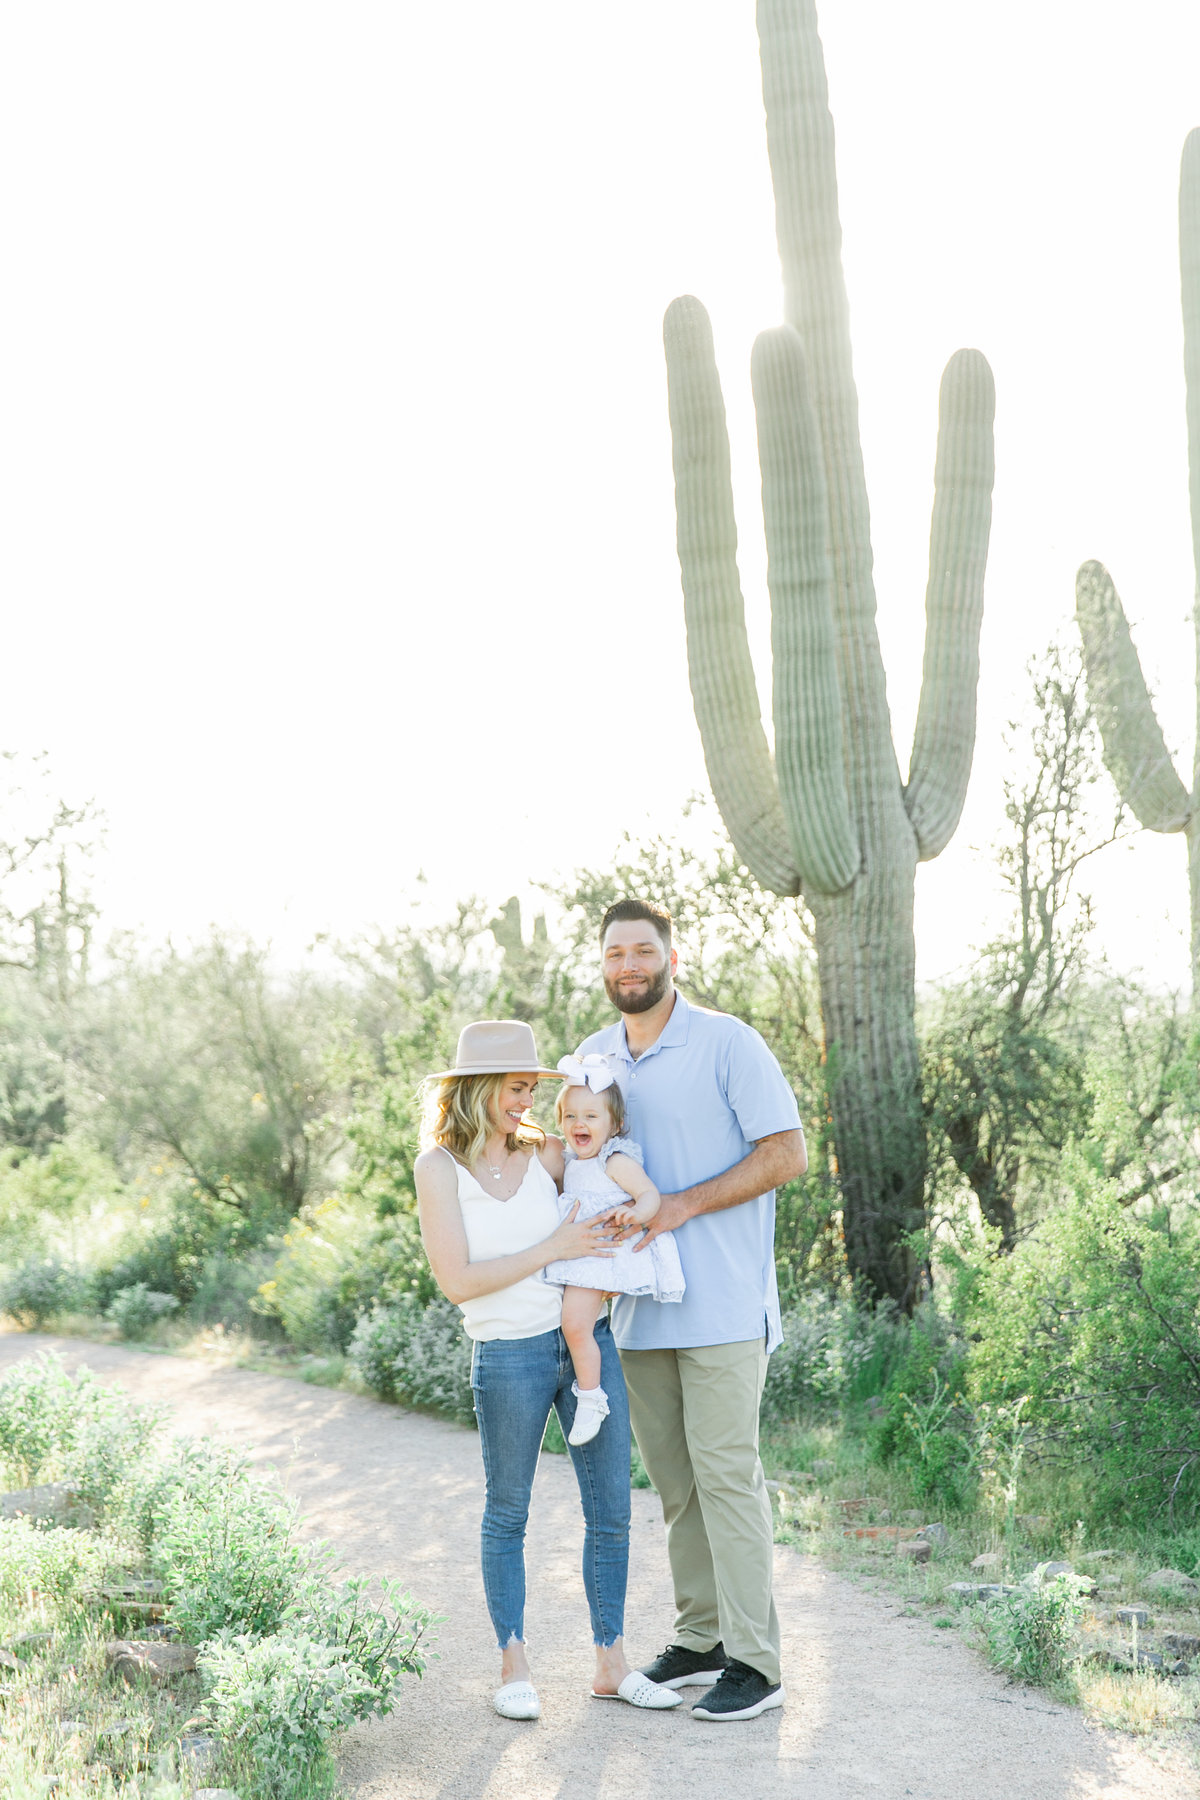 Karlie Colleen Photography - Scottsdale family photography - Dymin & family-105